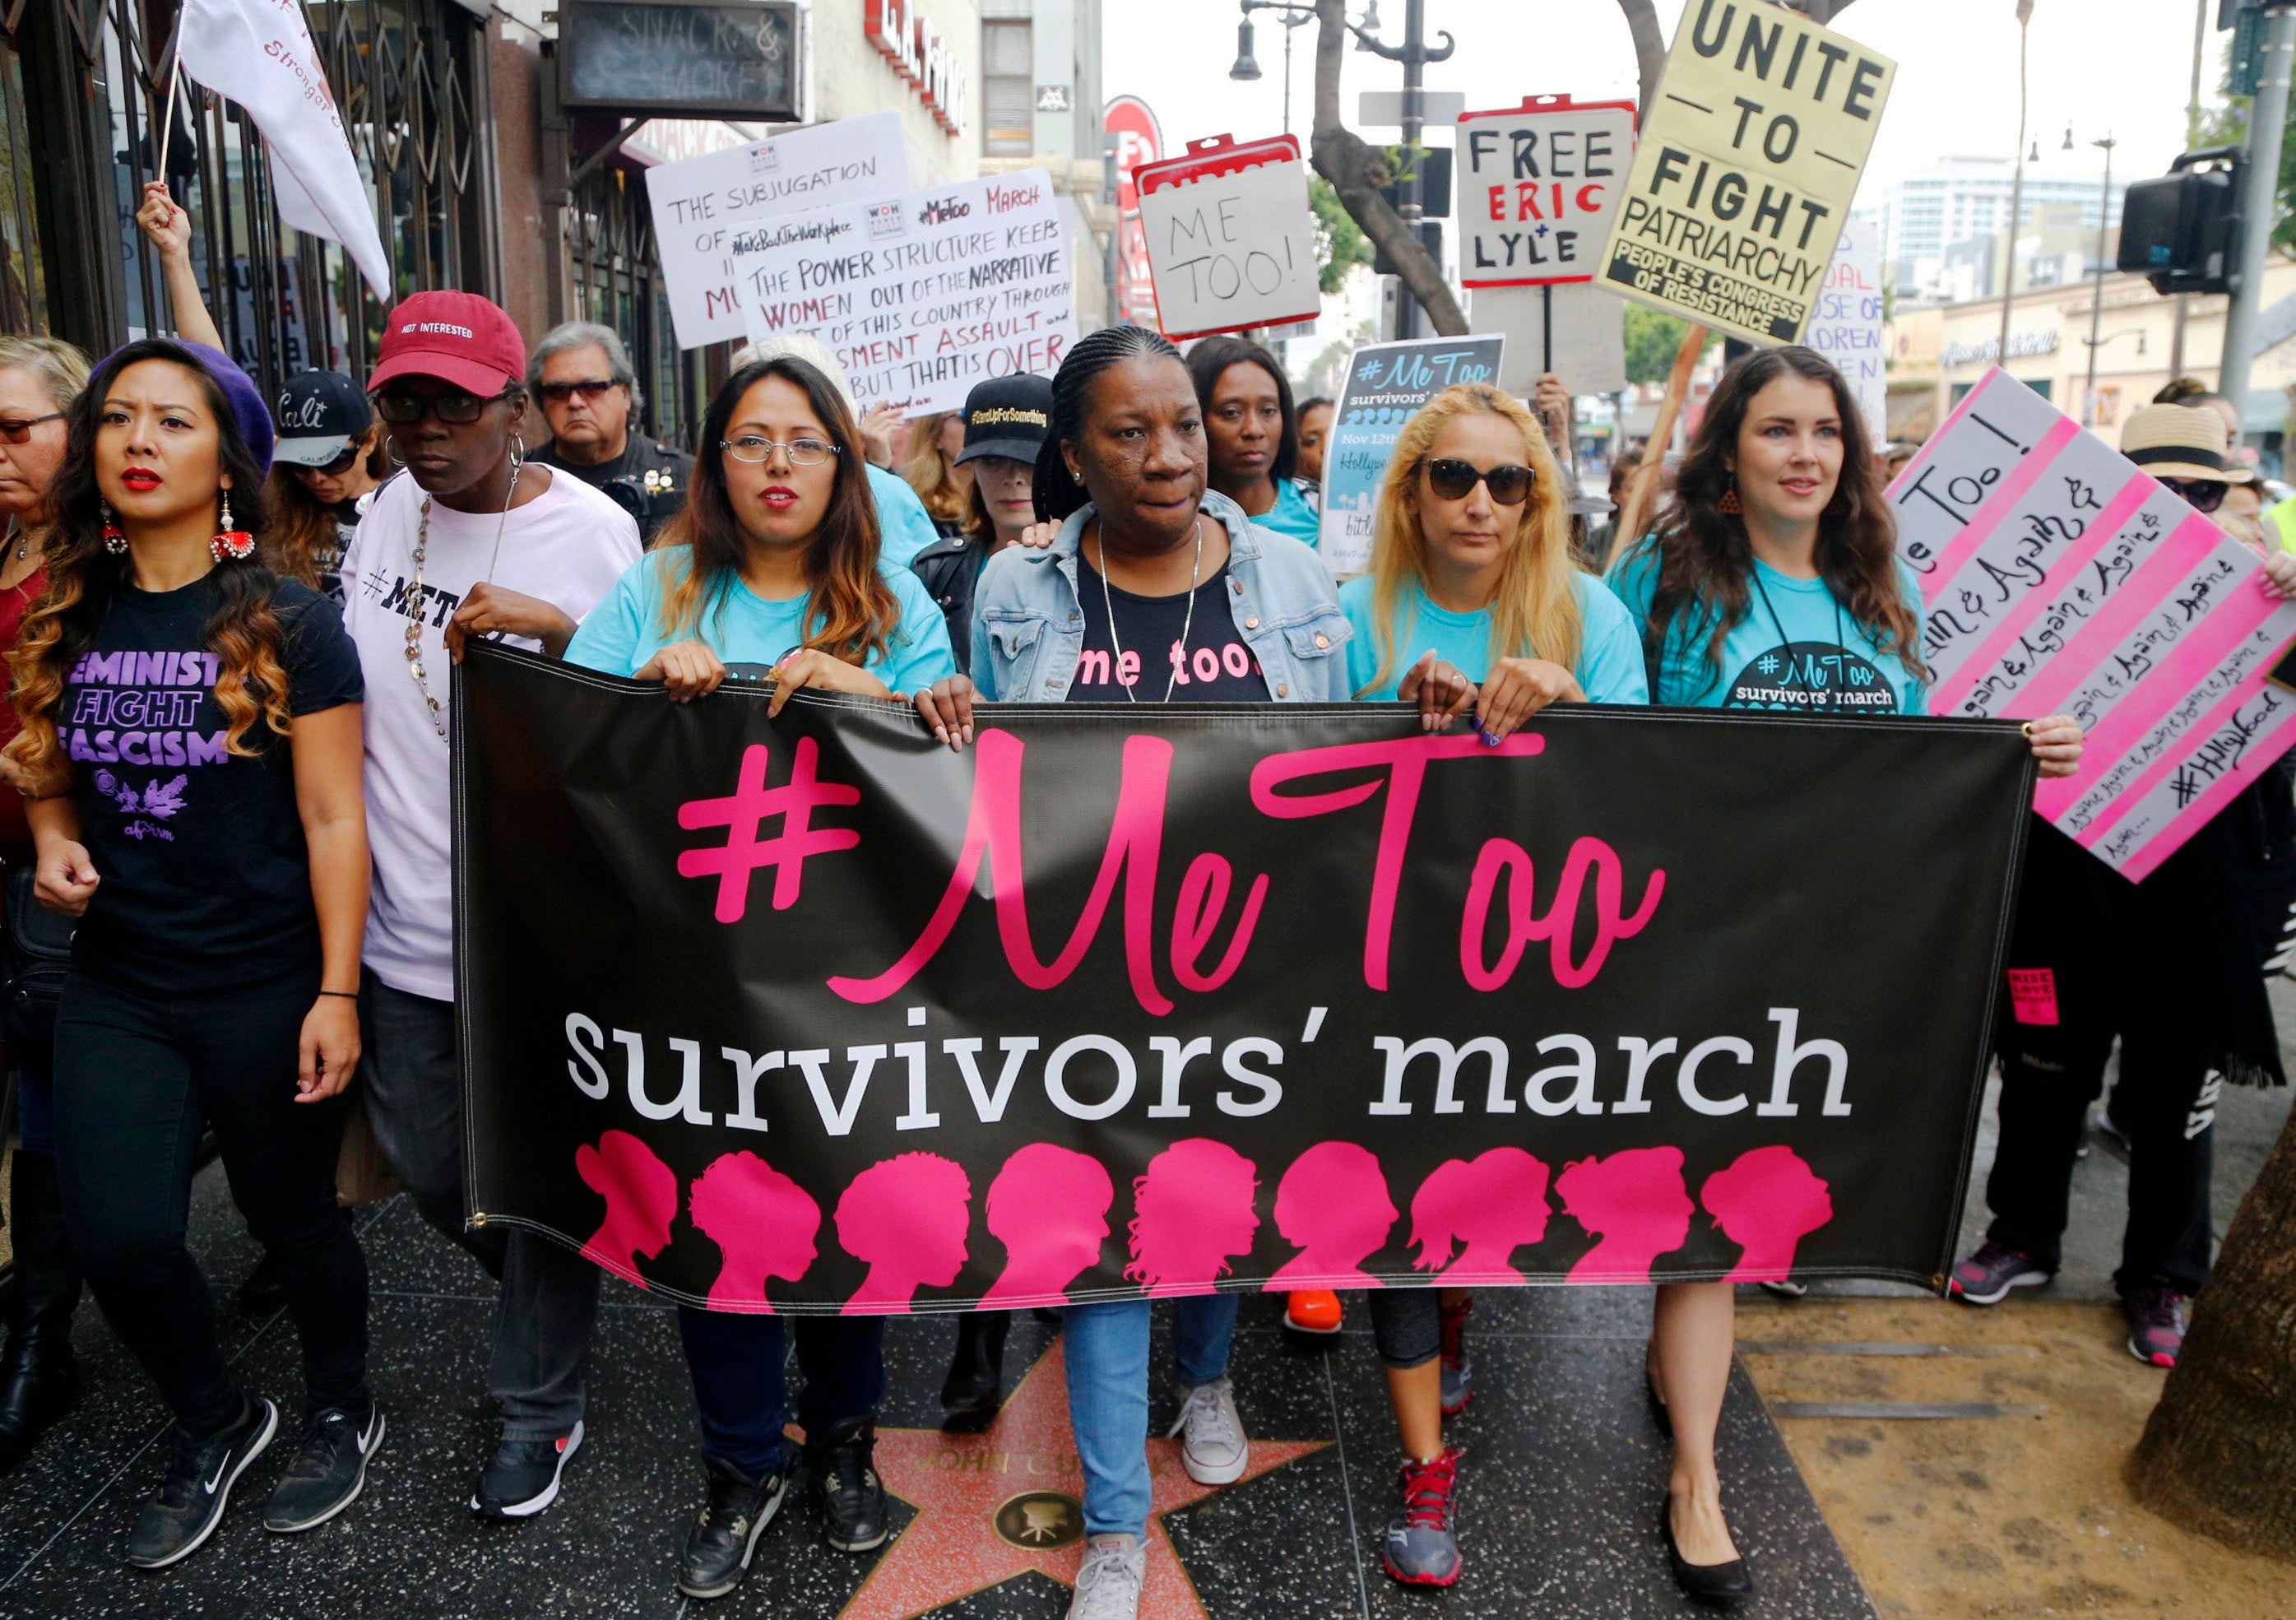 The MeToo movement has helped abused women come forward